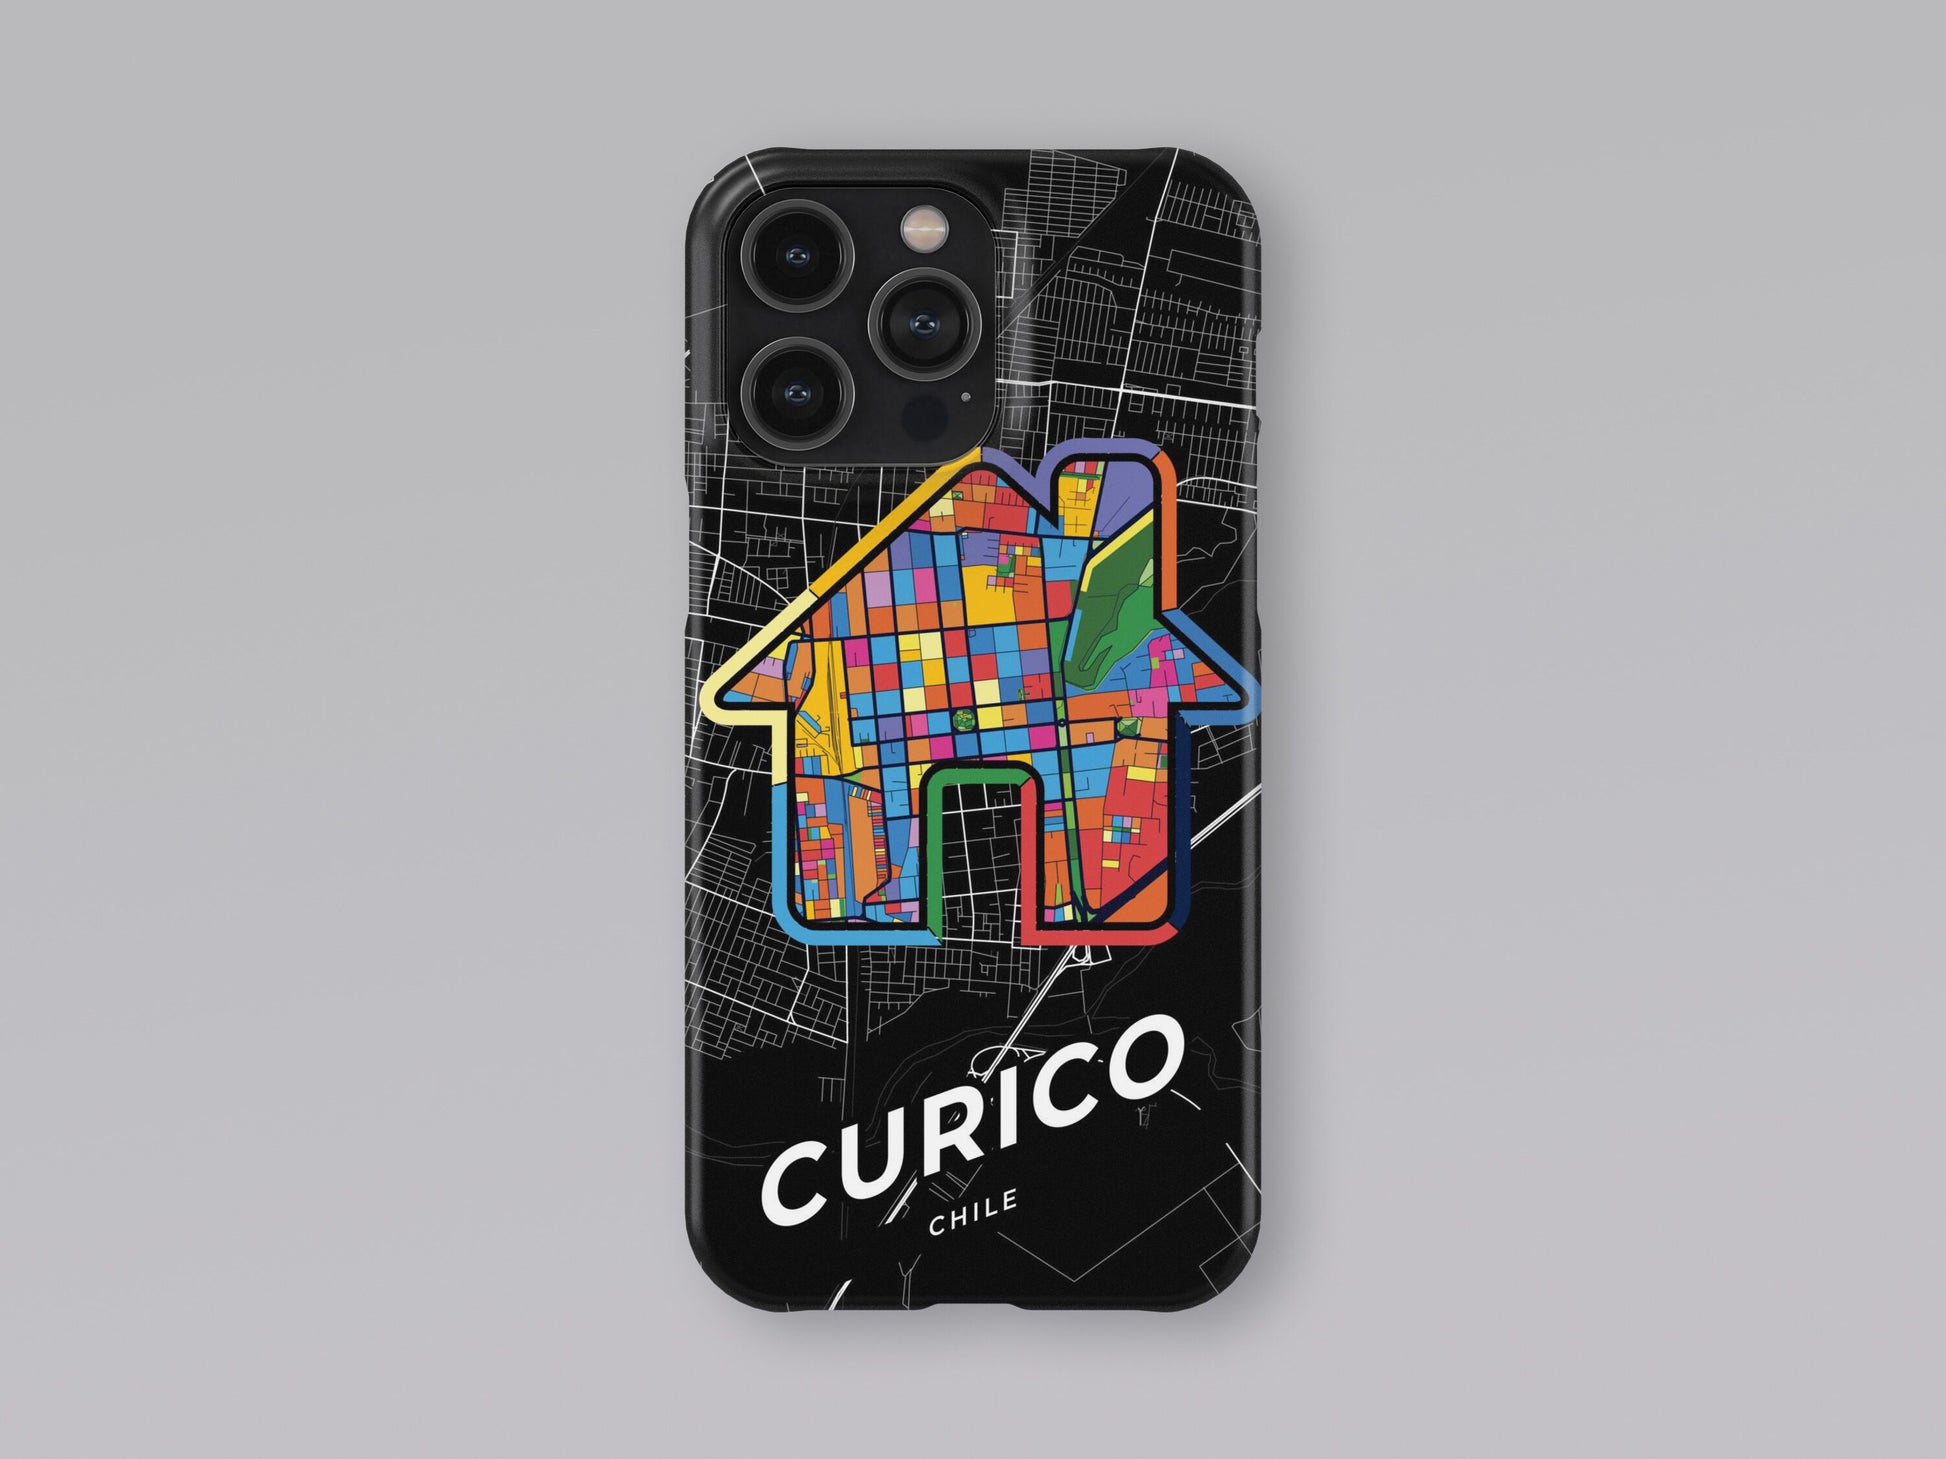 Curico Chile slim phone case with colorful icon. Birthday, wedding or housewarming gift. Couple match cases. 3